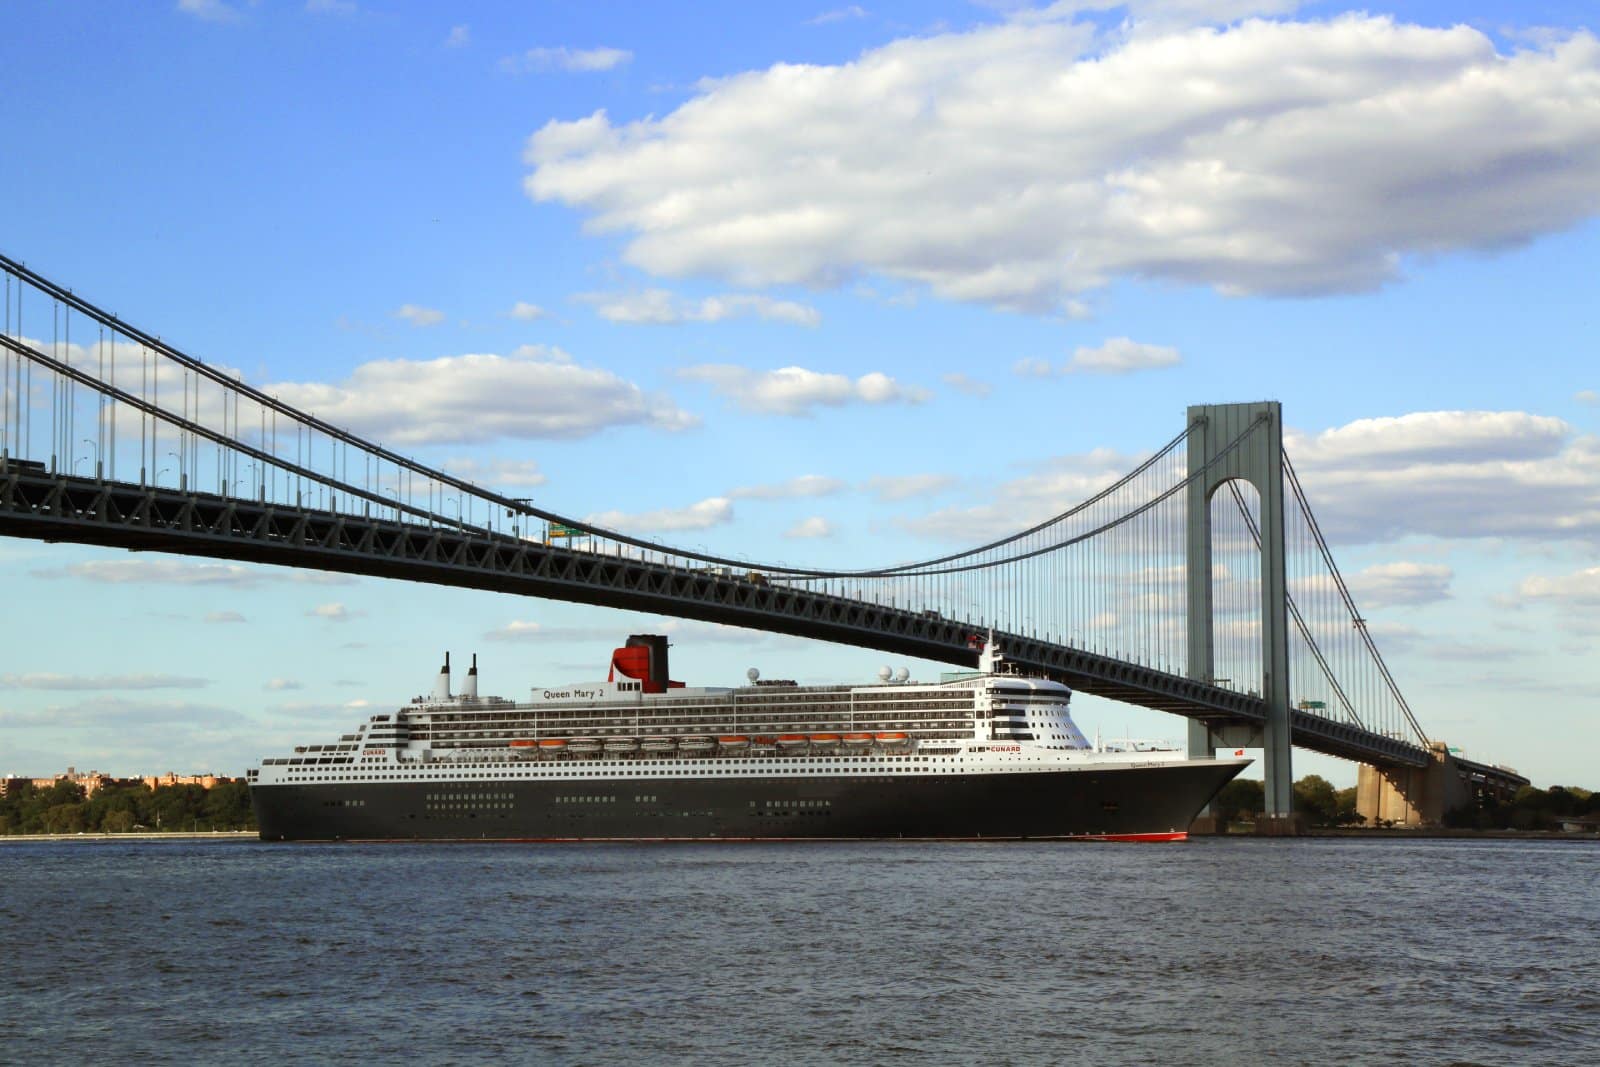 <p>Relive the golden age of ocean travel with a classic transatlantic crossing on the luxurious Queen Mary 2.</p>